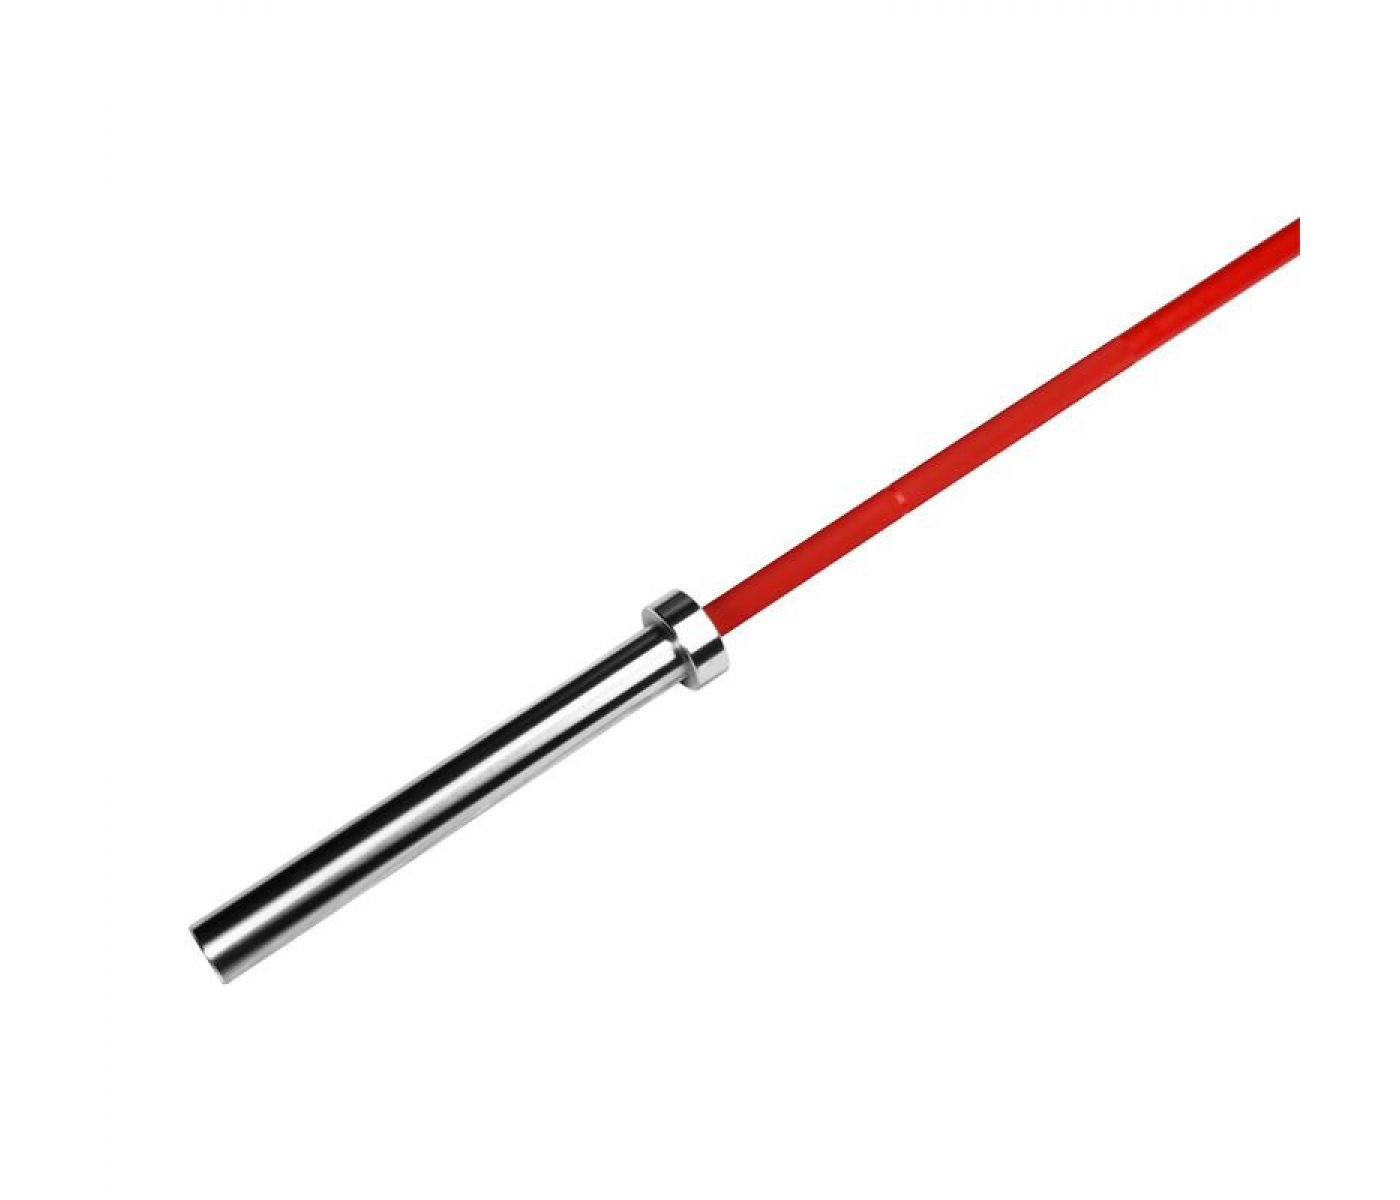 American Barbell the California Bar Red 20 kg